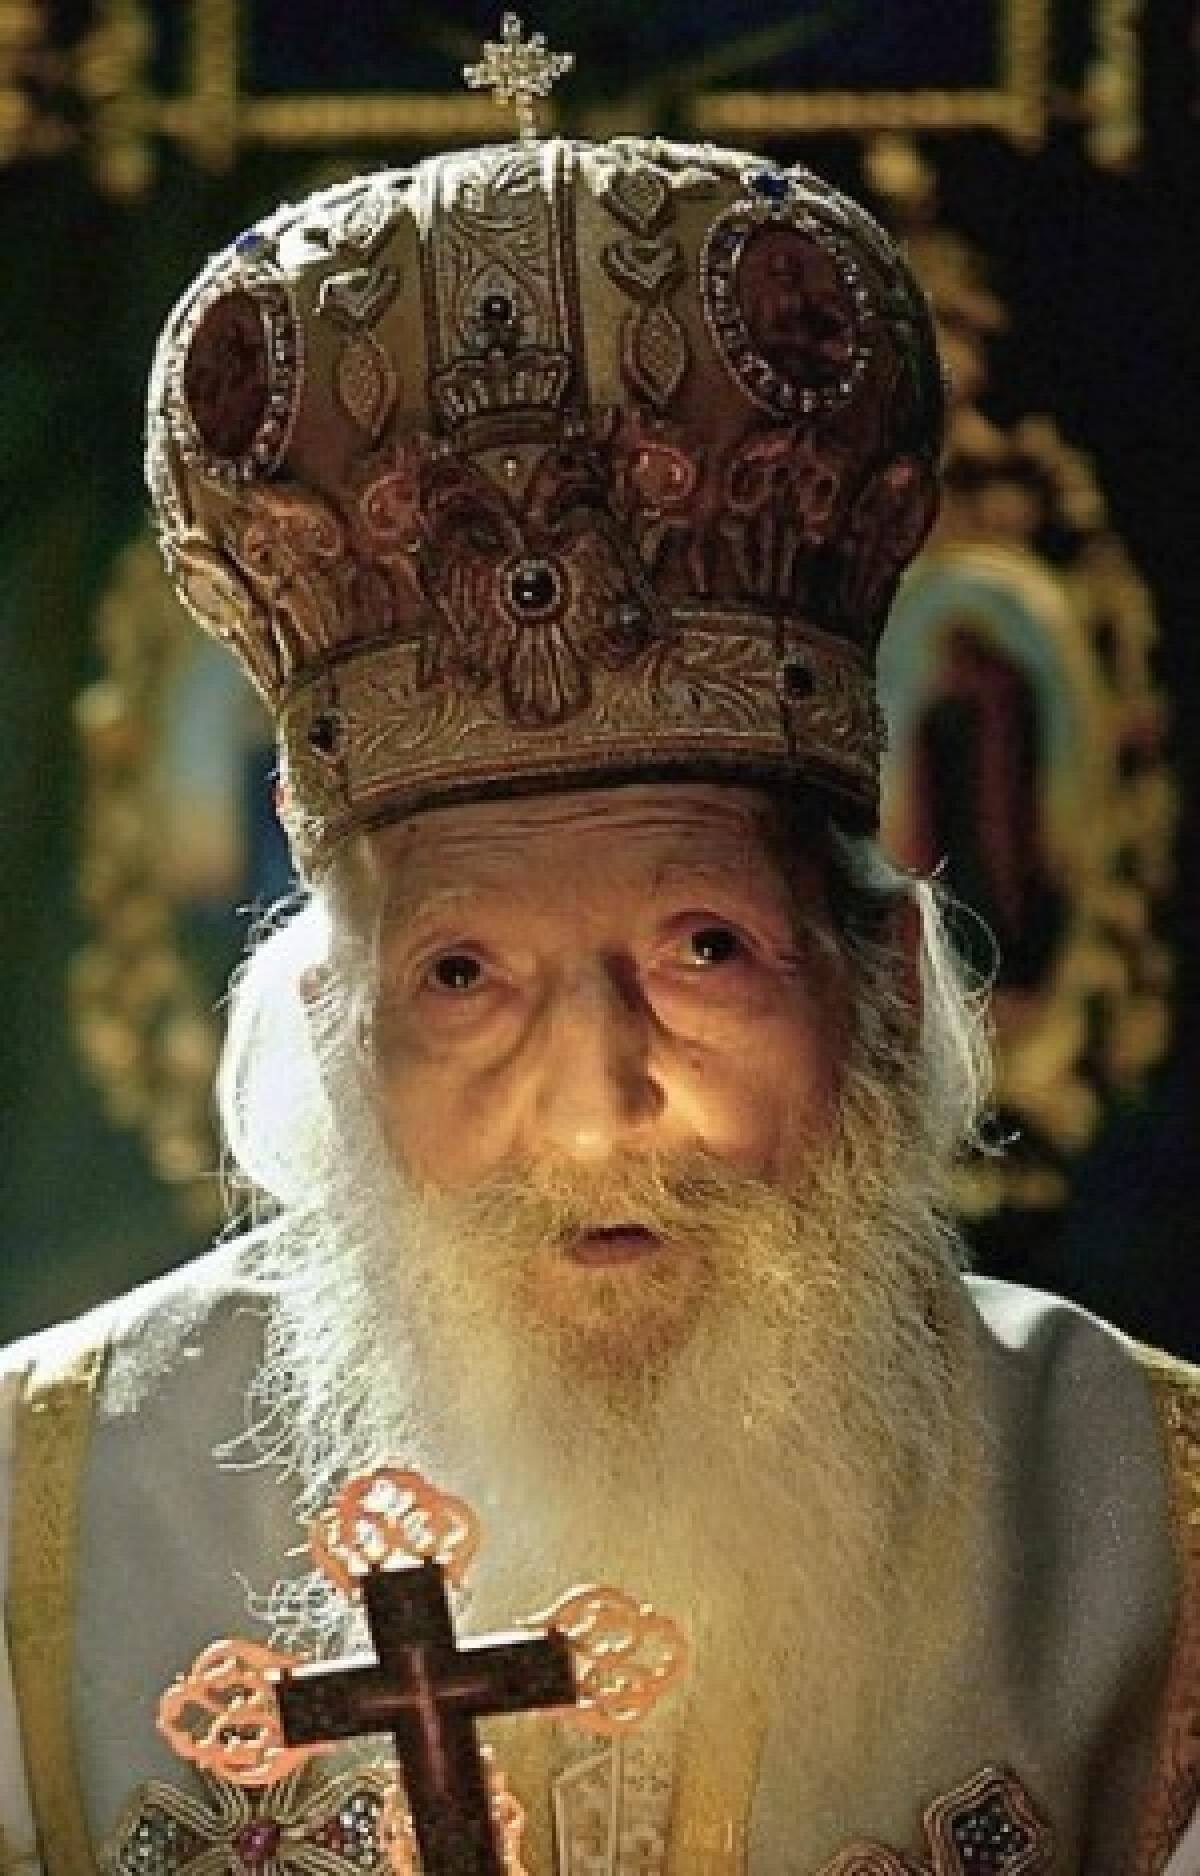 Patriarch Pavle took over the church in 1990. The church's call for then-President Slobodan Milosevic's resignation helped lead to the popular revolt that eventually ousted him in October 2000.